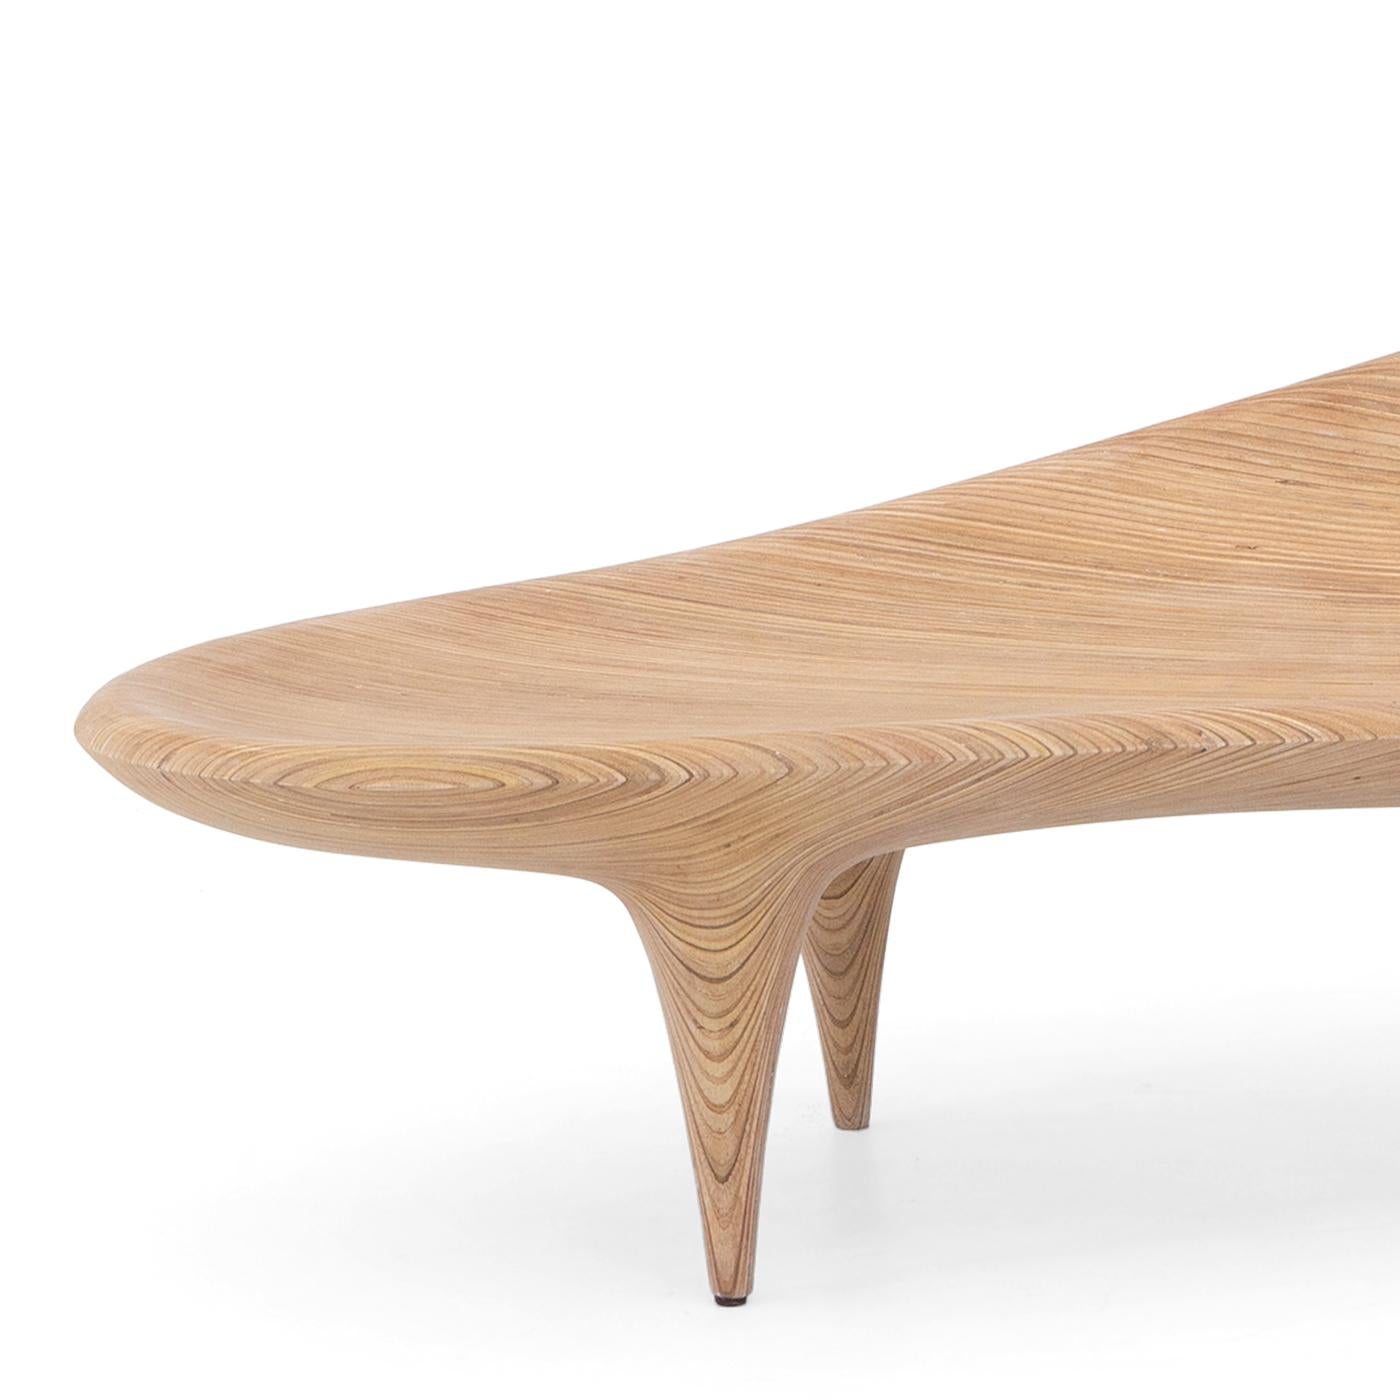 Bench woodvein lines with solid hand carved
eucalyptus wood, hand-polished wood in natural
finish. Bench with 4 feets. Solid wood include 
movement, cracks and changes in wood conditions, 
this is the essential characteristic of natural solid